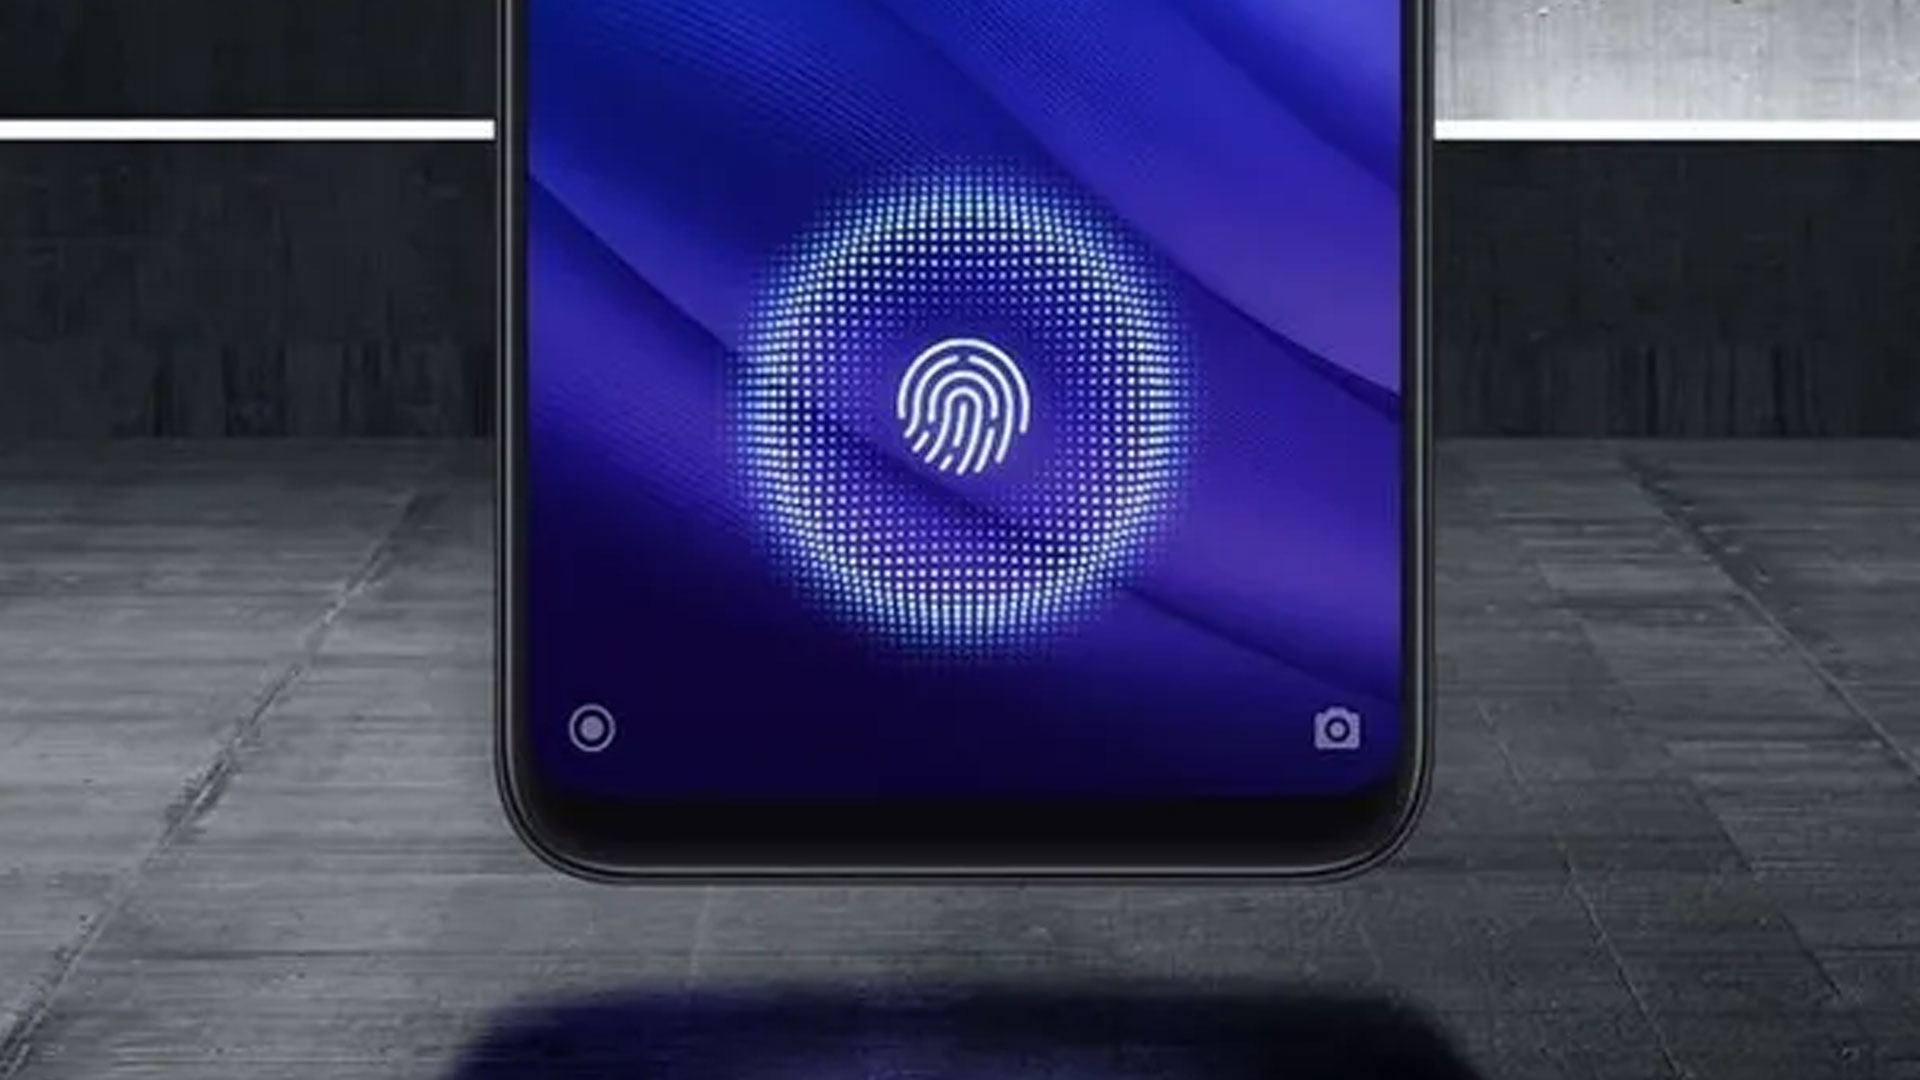 MIUI : unlocking with the fingerprint is more customizable 